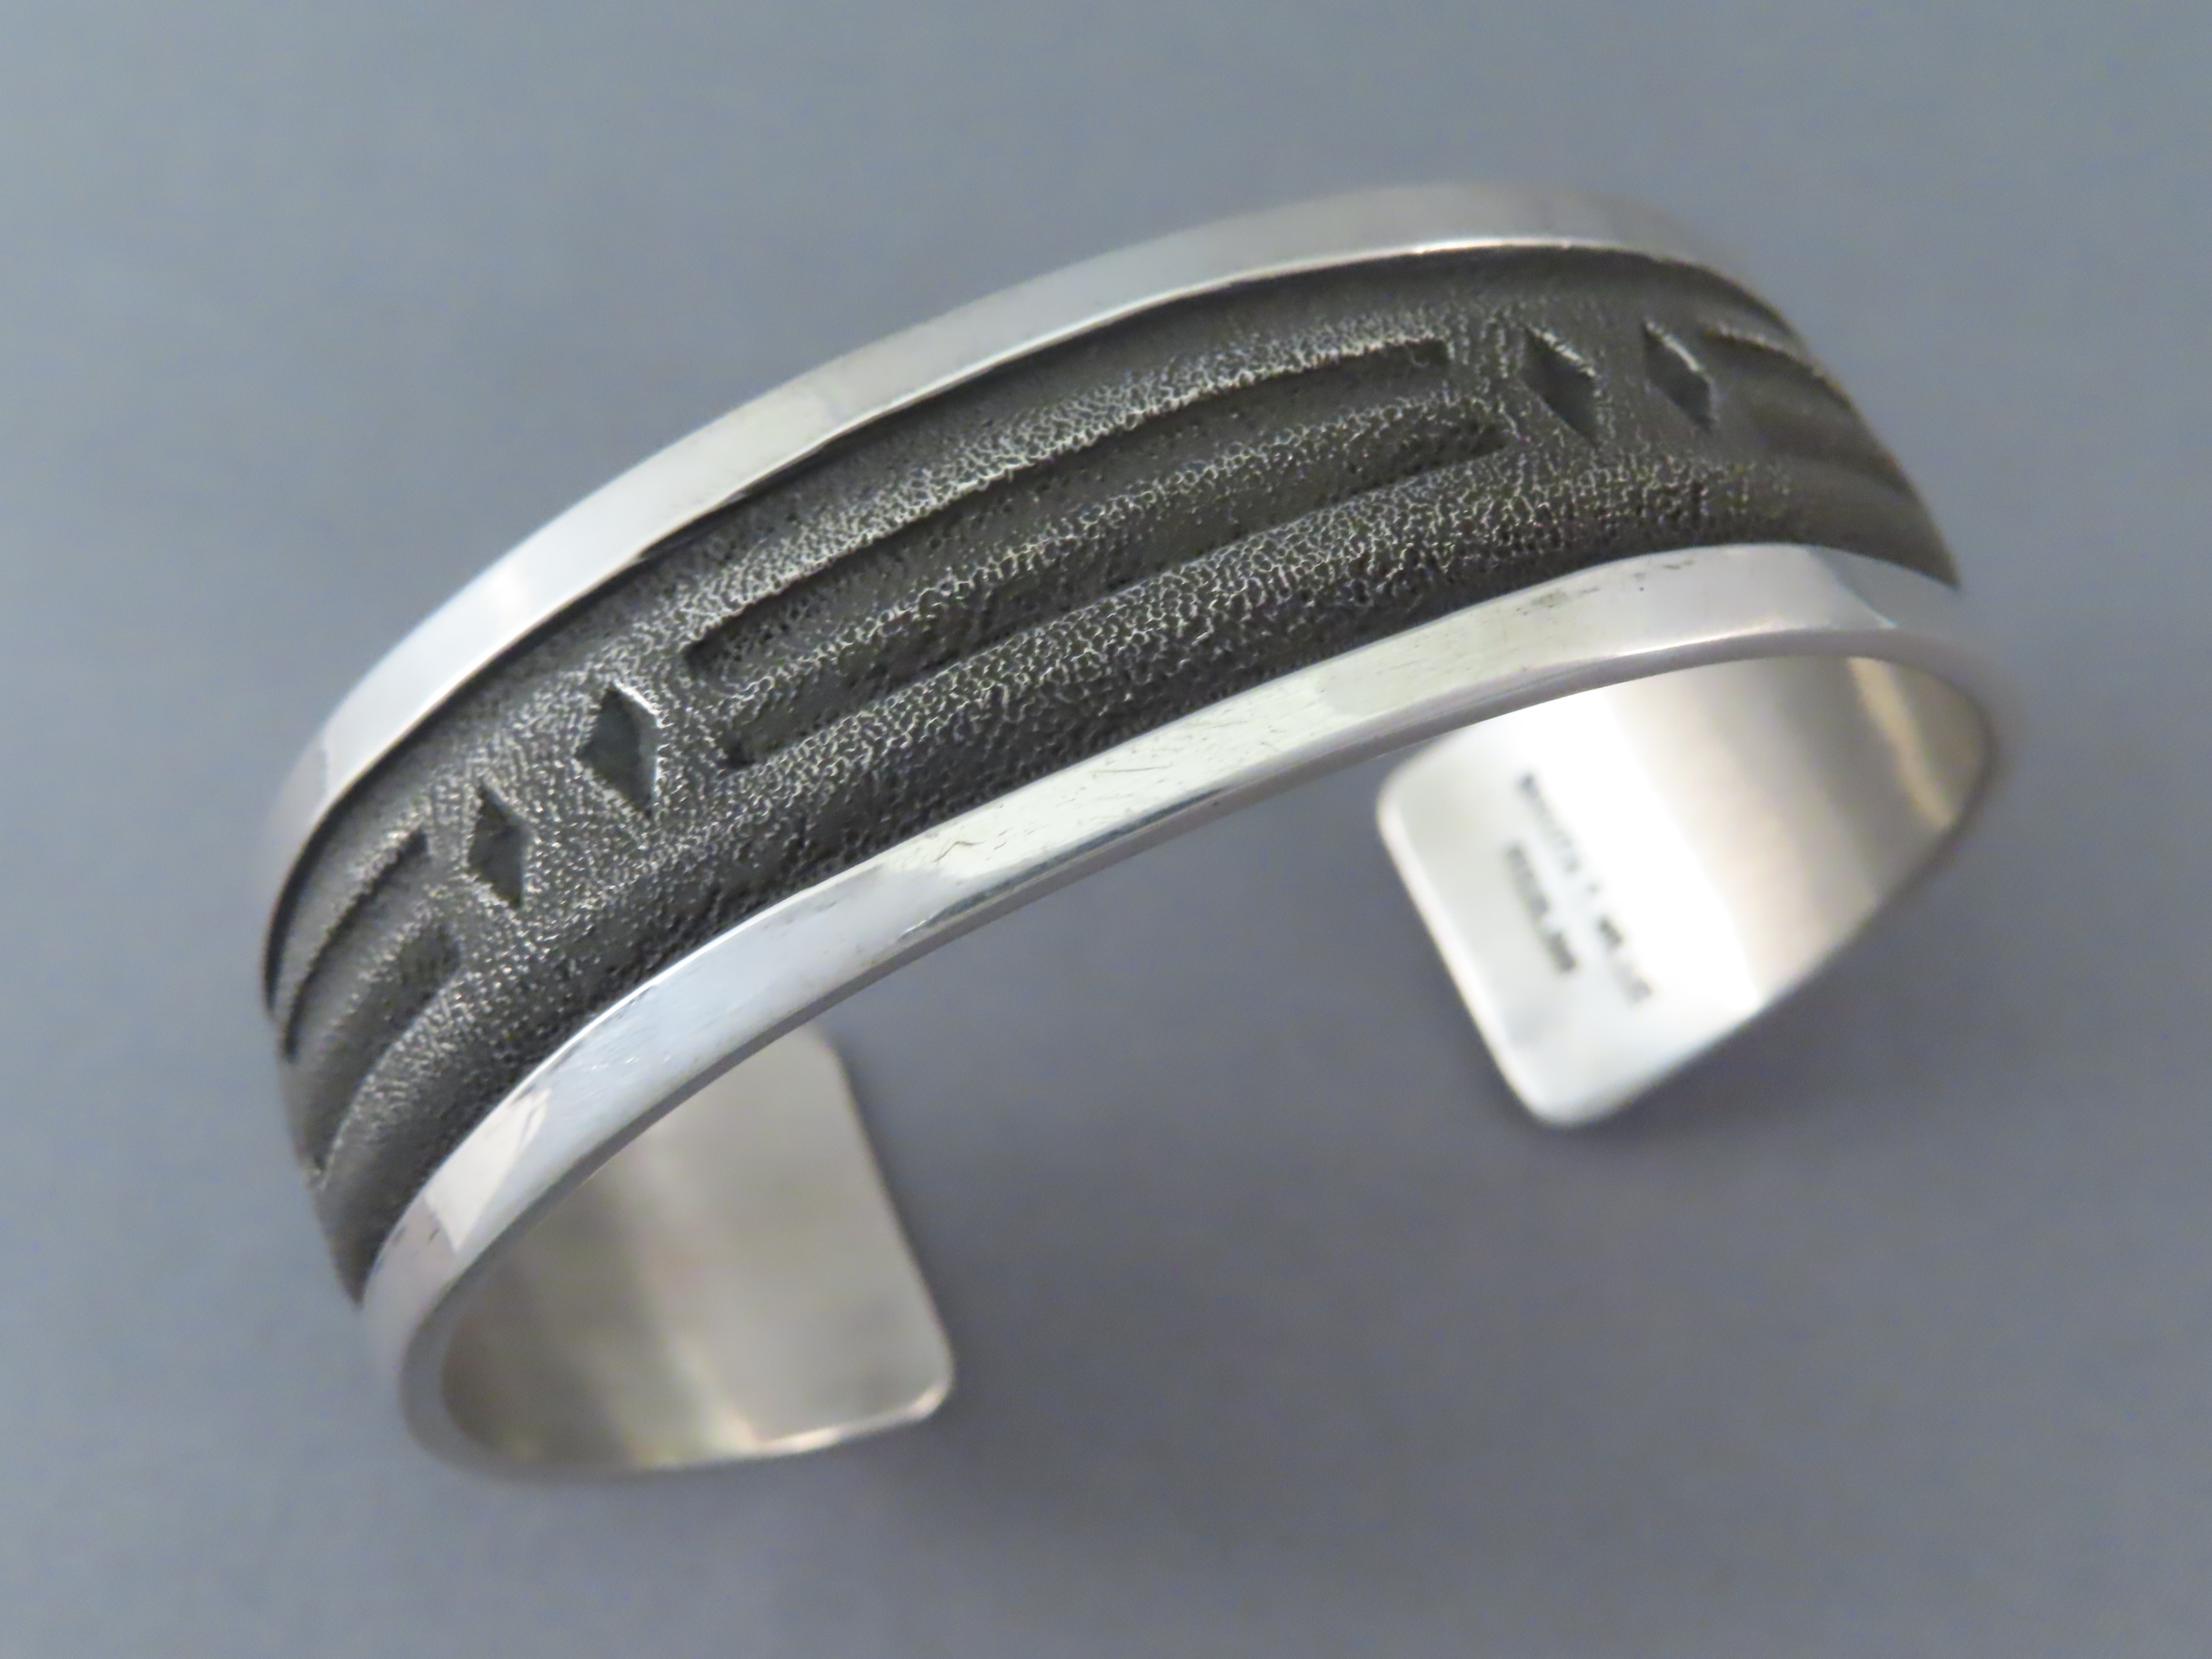 Larger Sterling Silver Cuff Bracelet by Native American Navajo Indian jewelry artist, Dakota Willie $385- FOR SALE